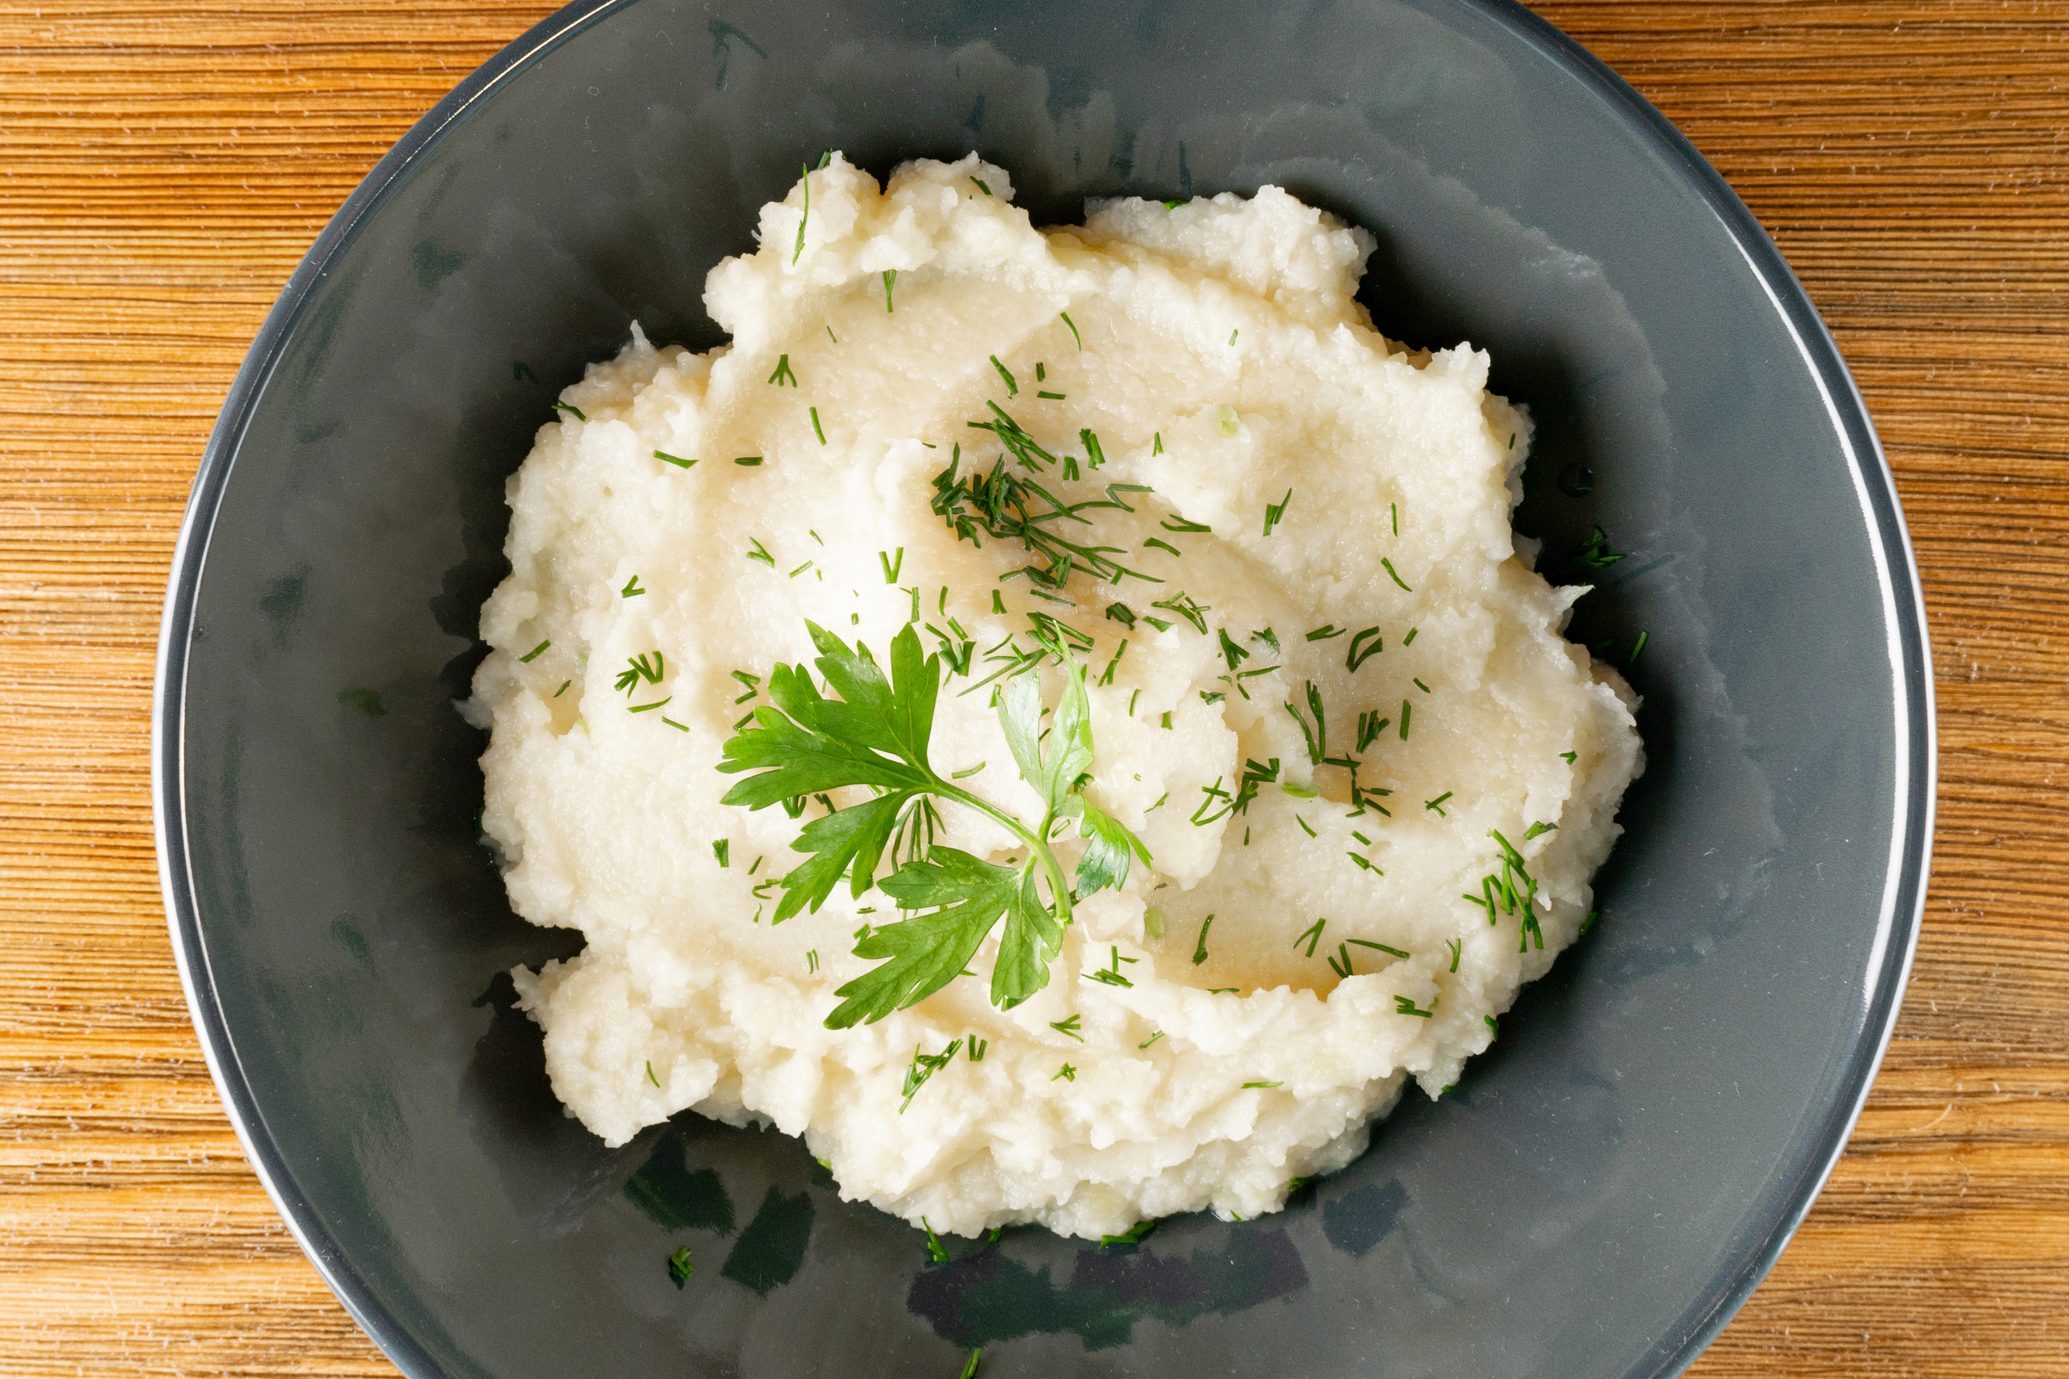 Instant mashed potatoes from scratch! Who'd a thunk it! 